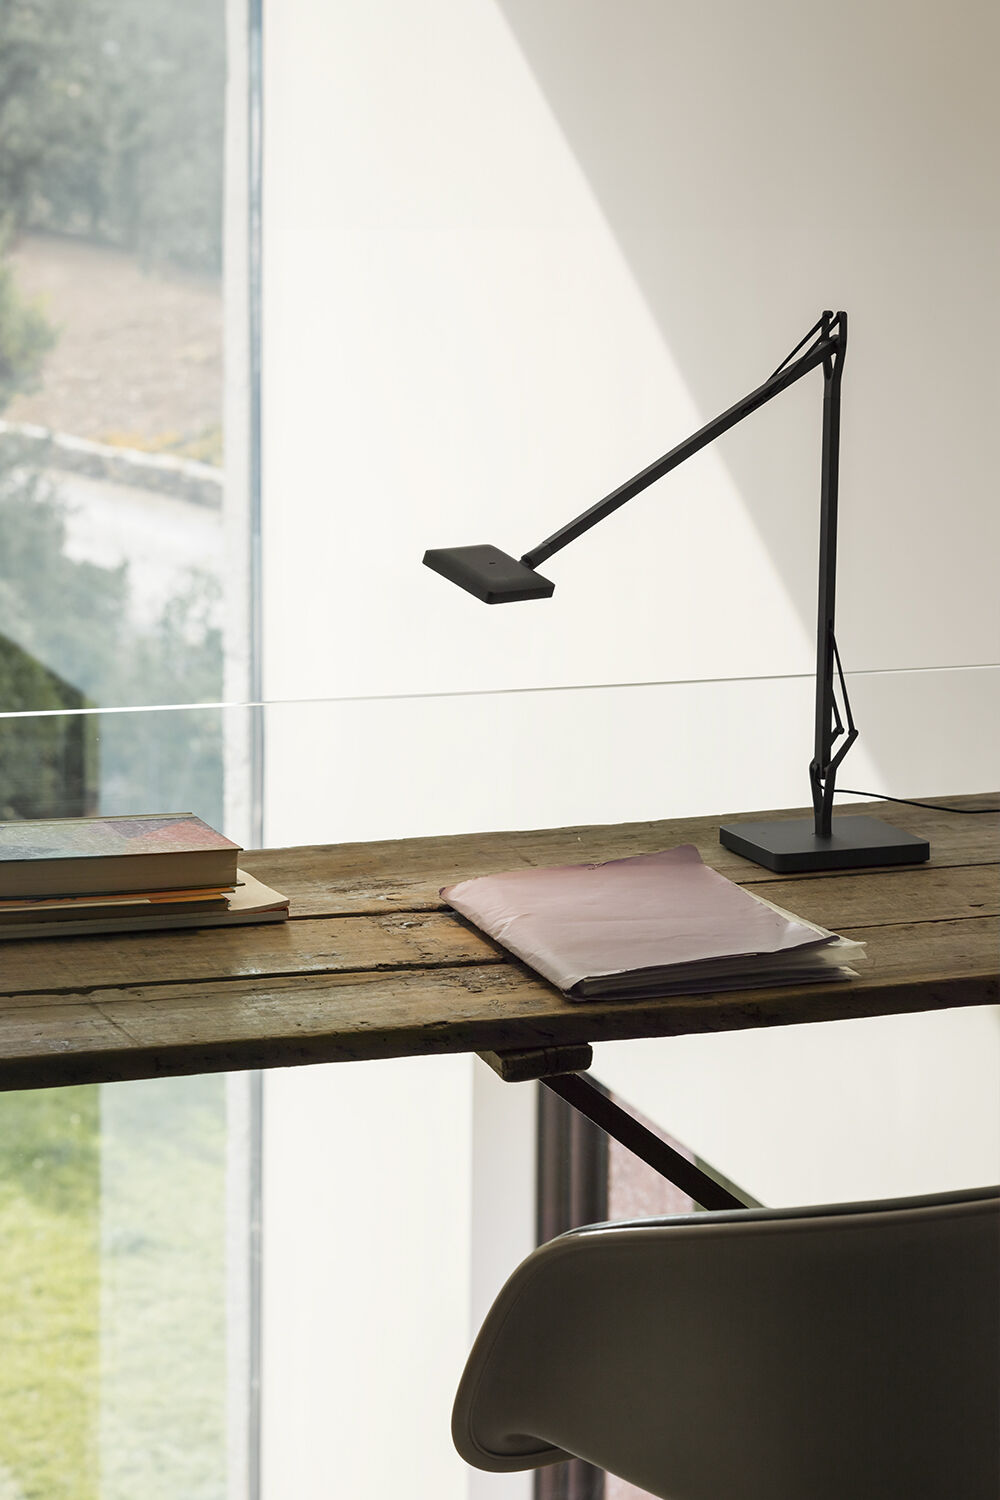 Workspace with suspension lamps on the table